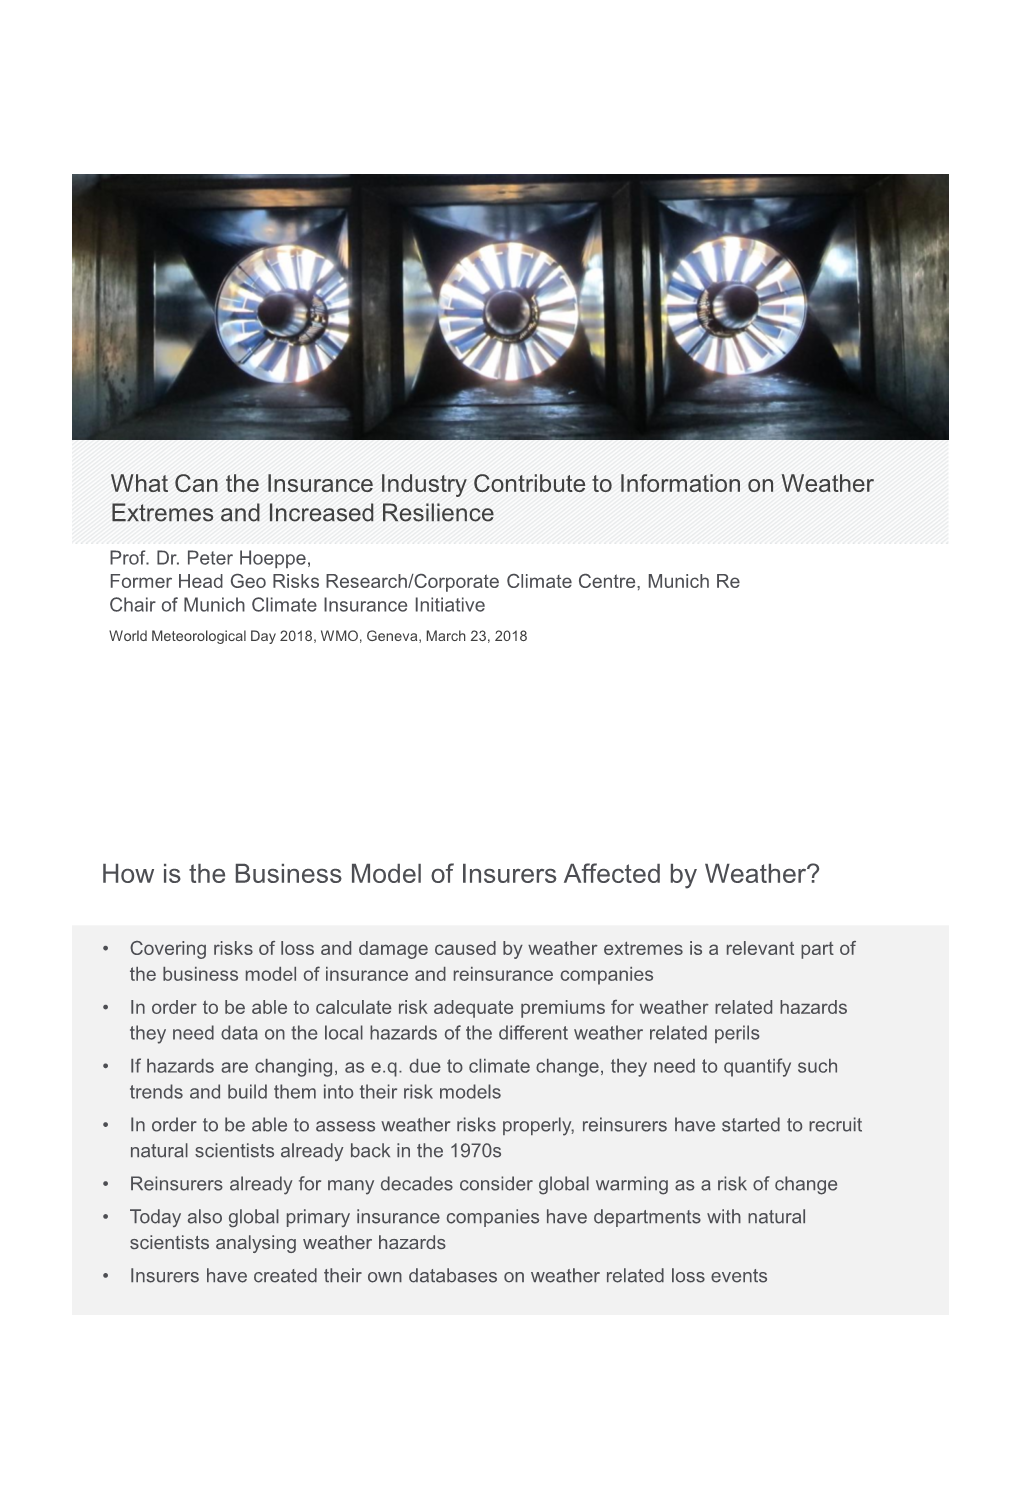 How Is the Business Model of Insurers Affected by Weather?